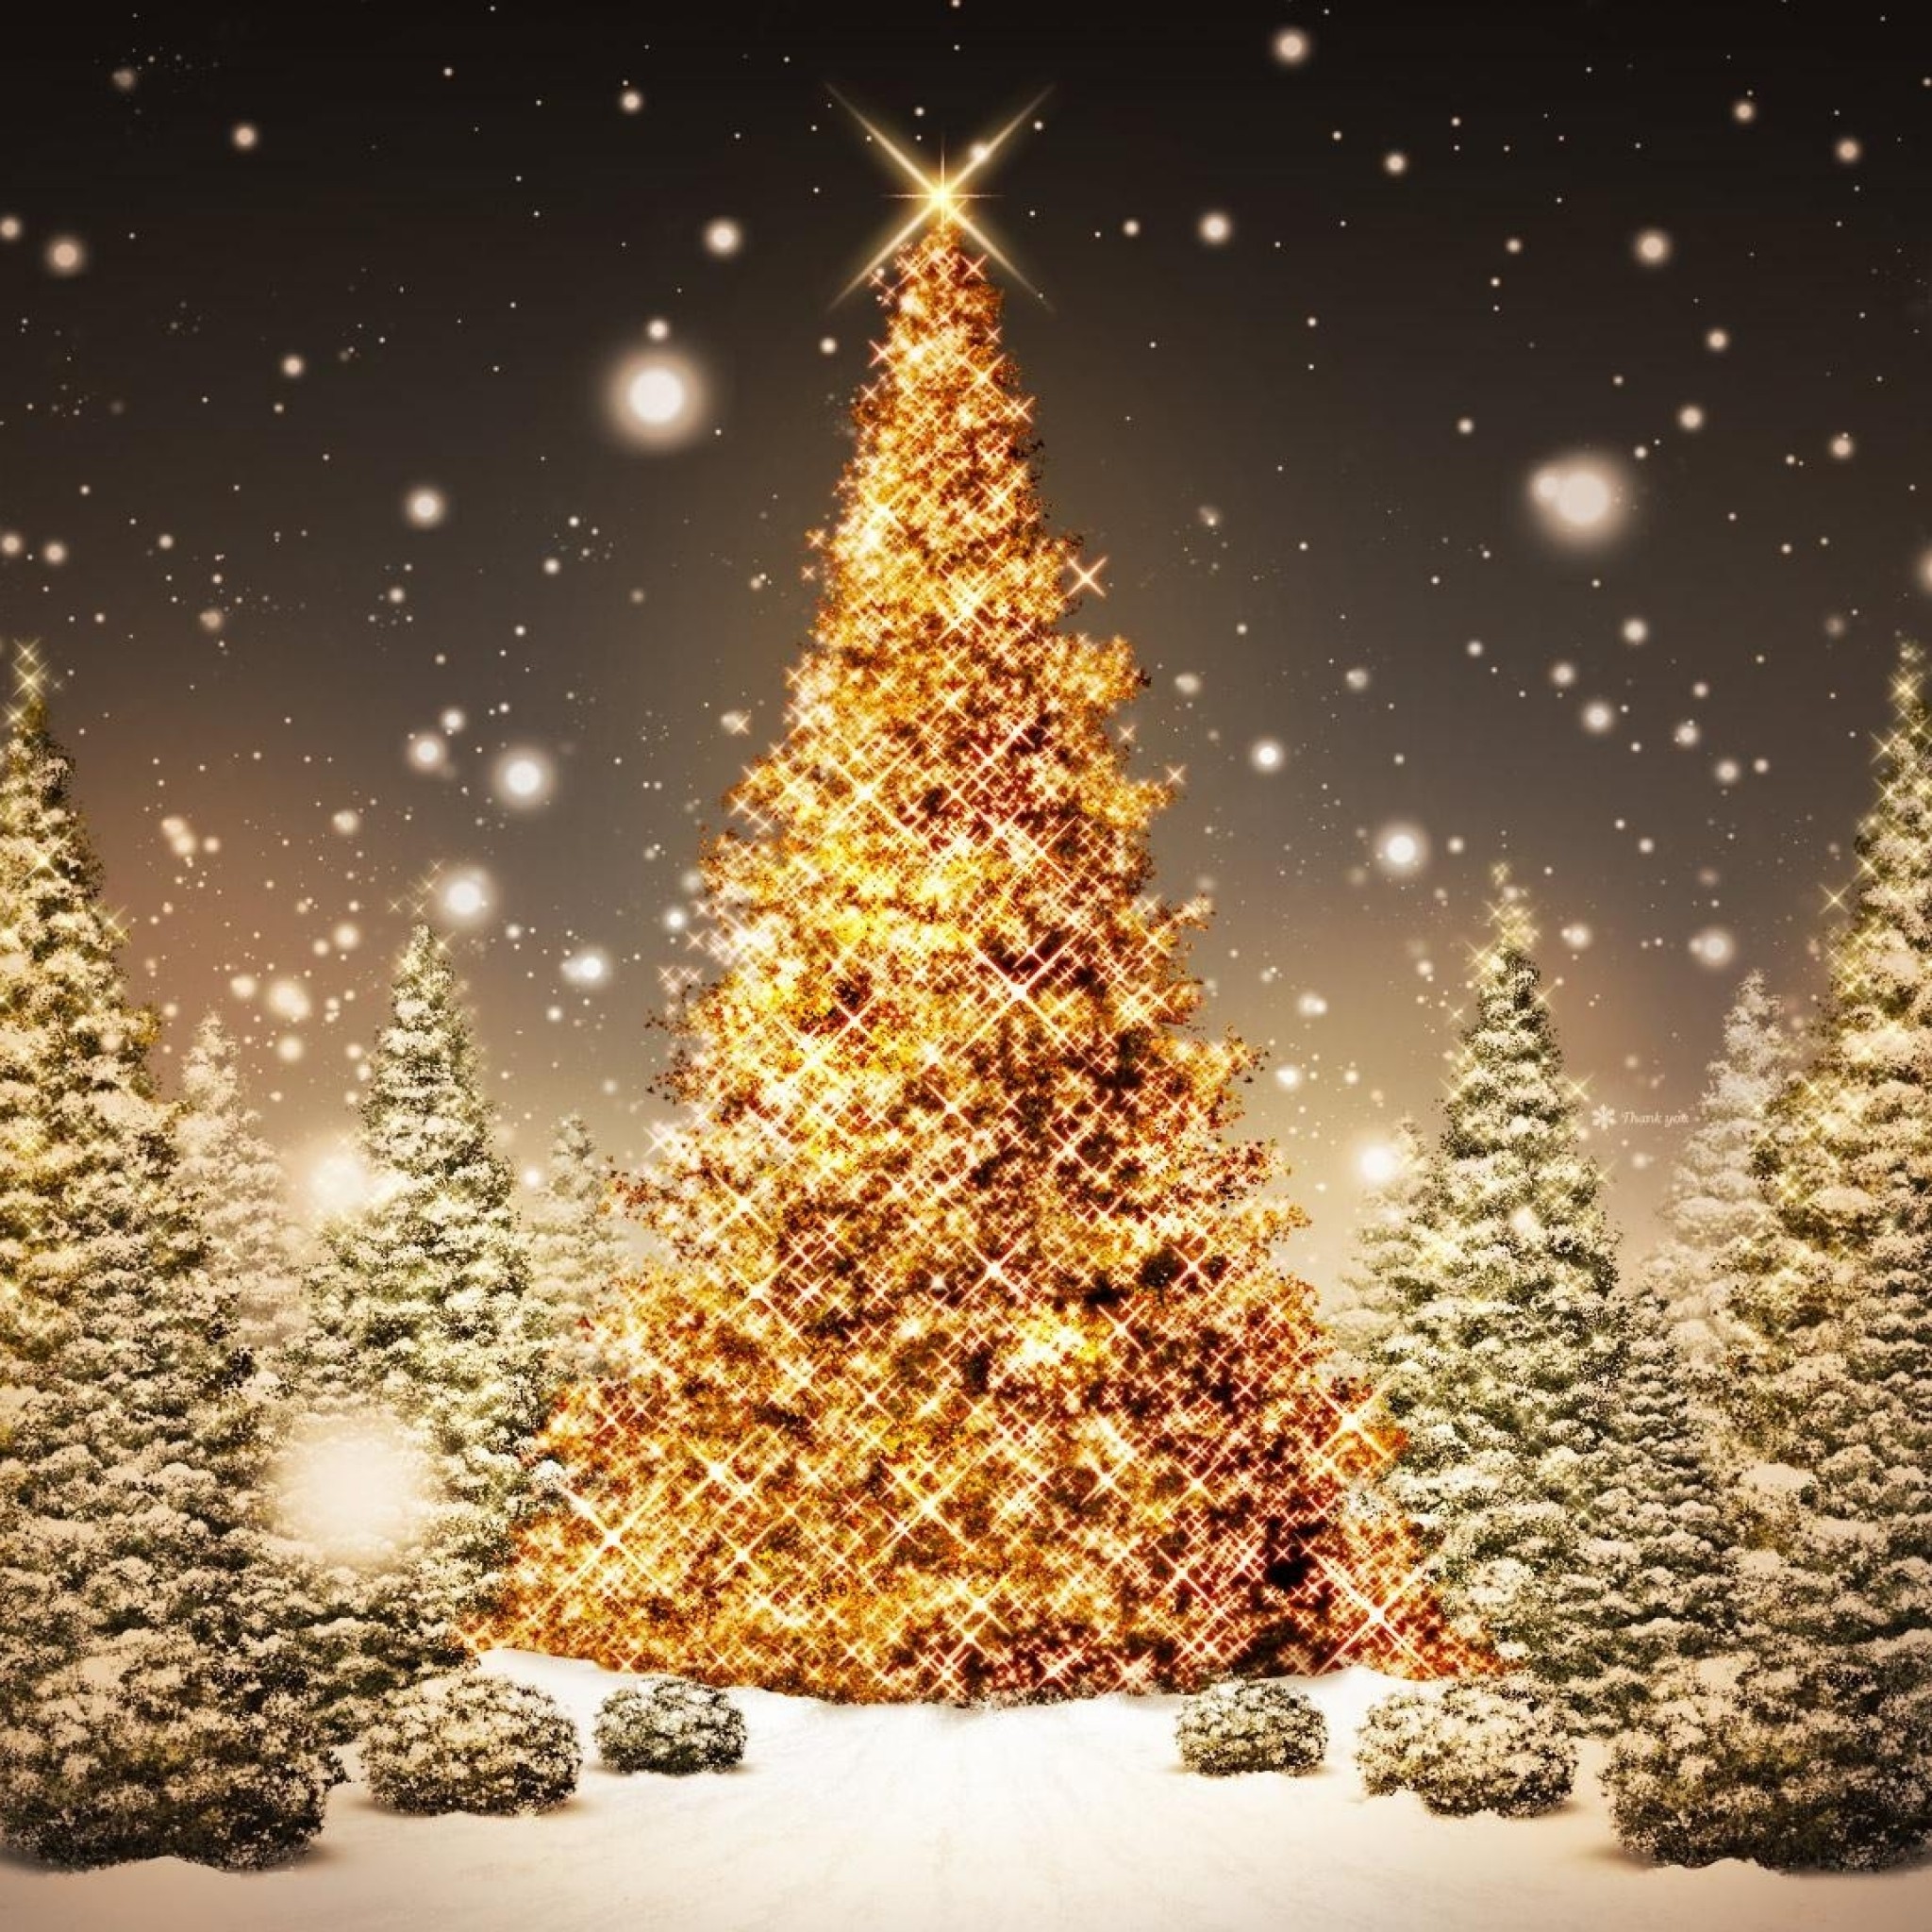 2048x2048 wallpaper.wiki-Christmas-wallpaper-for-ipad-PIC-WPC006422